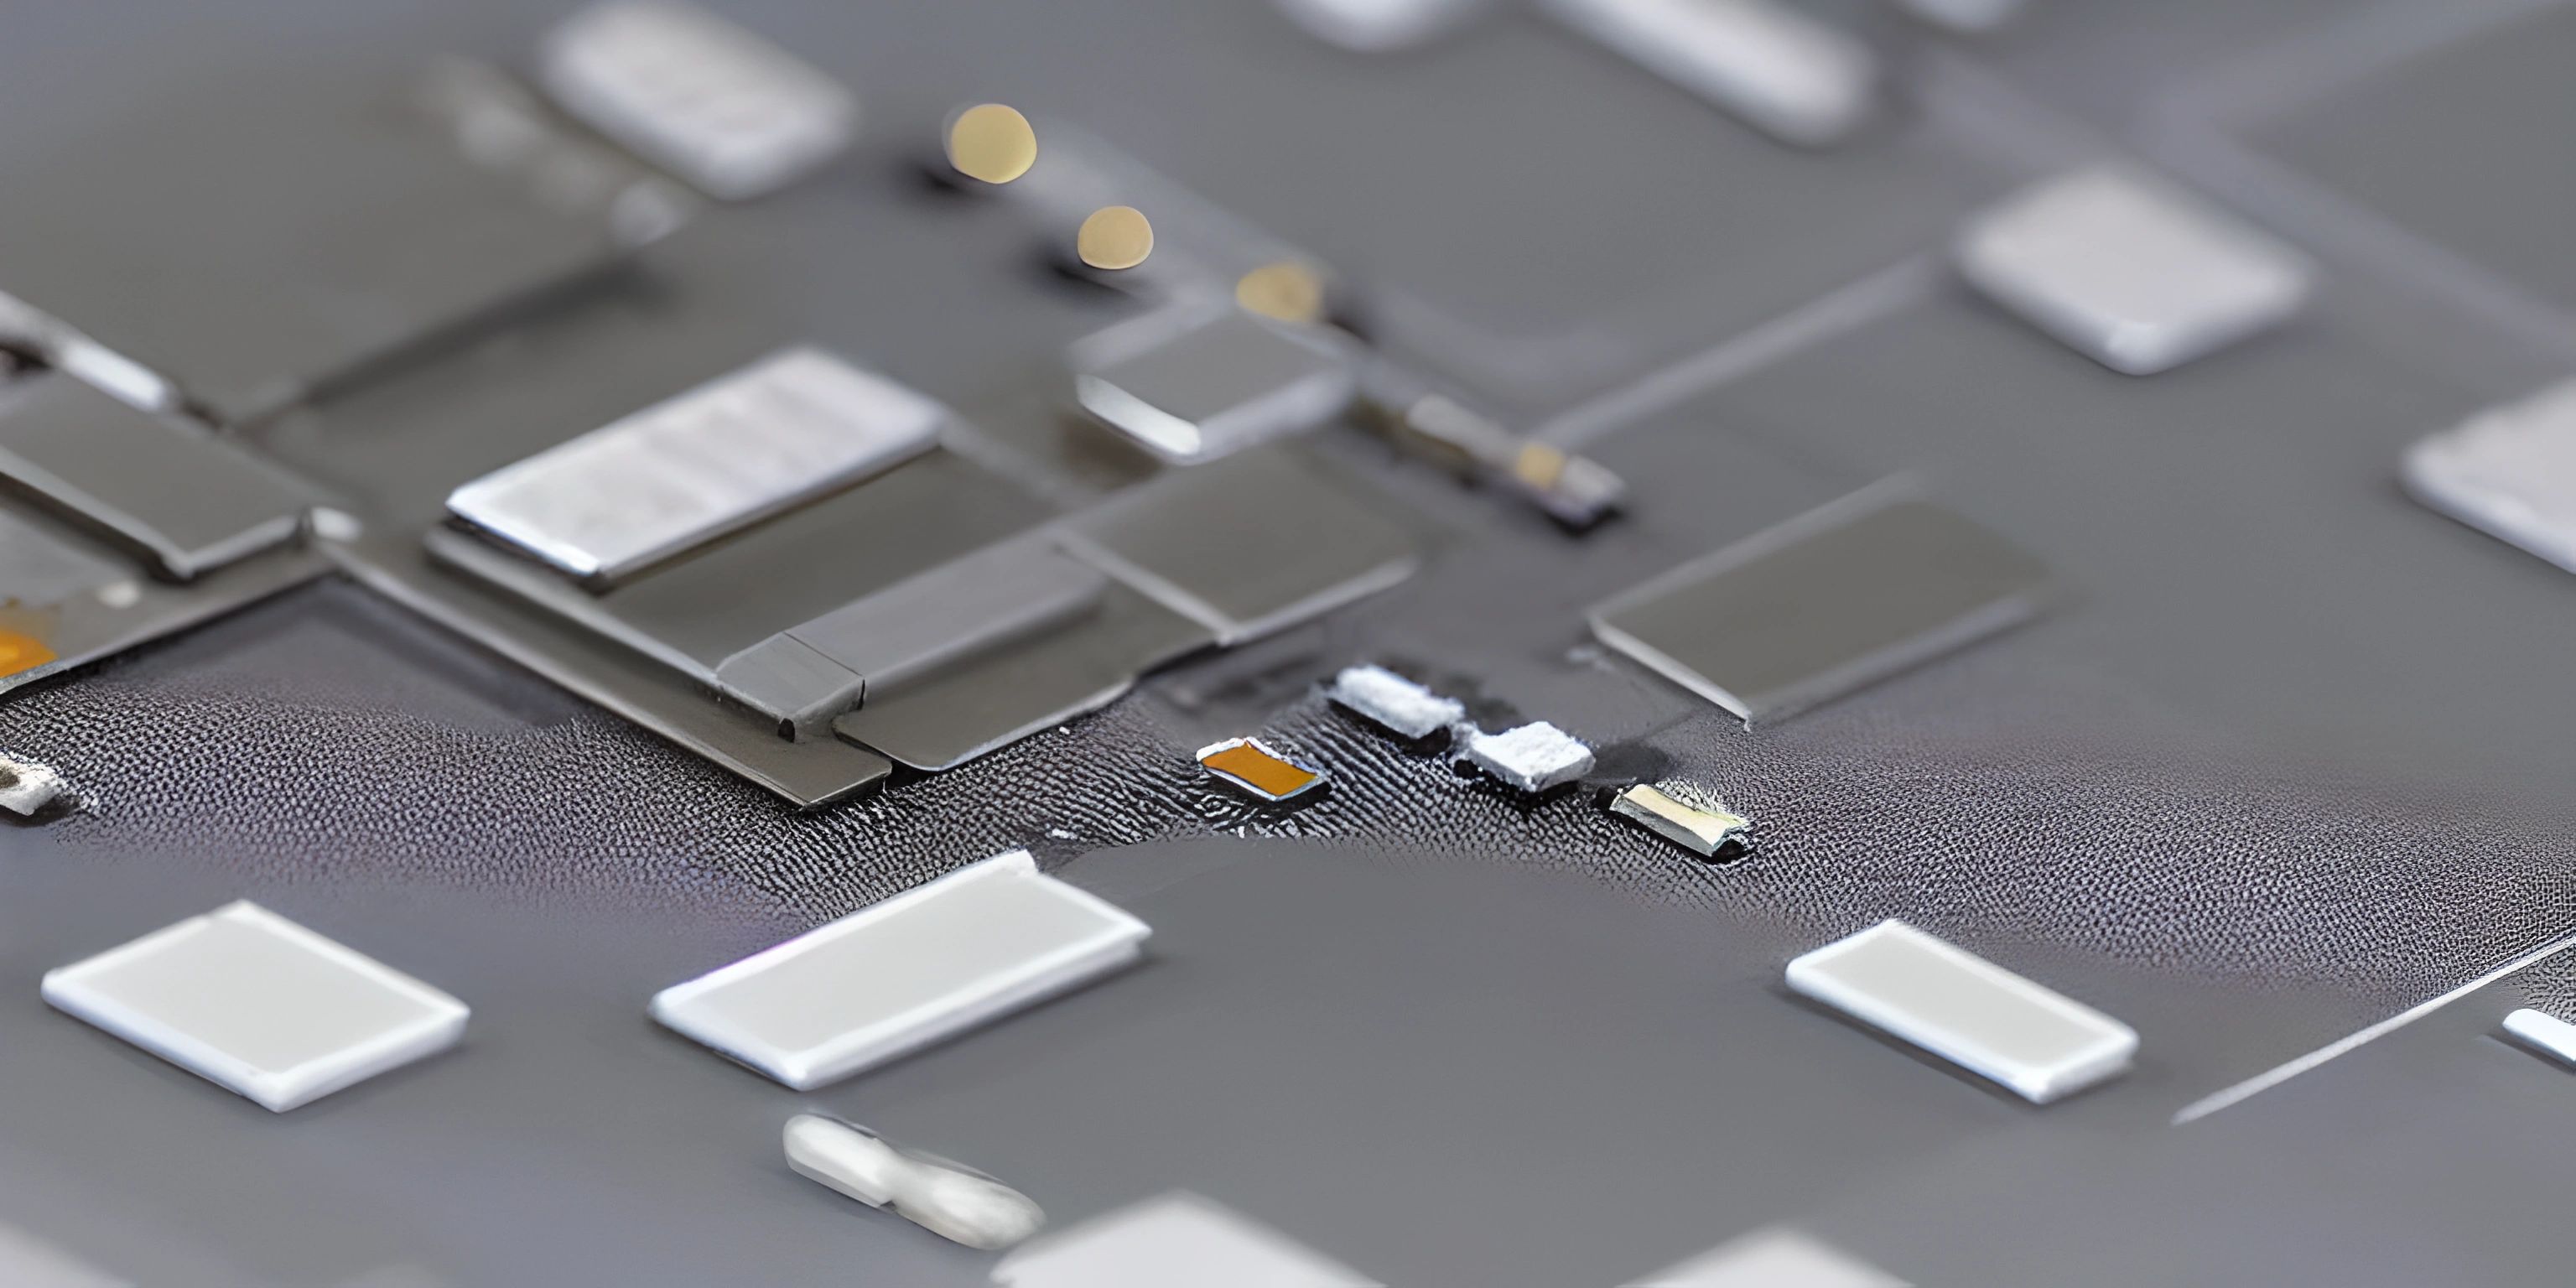 the keys of a smart phone are visible in some plastic shapes for the components to be assembled